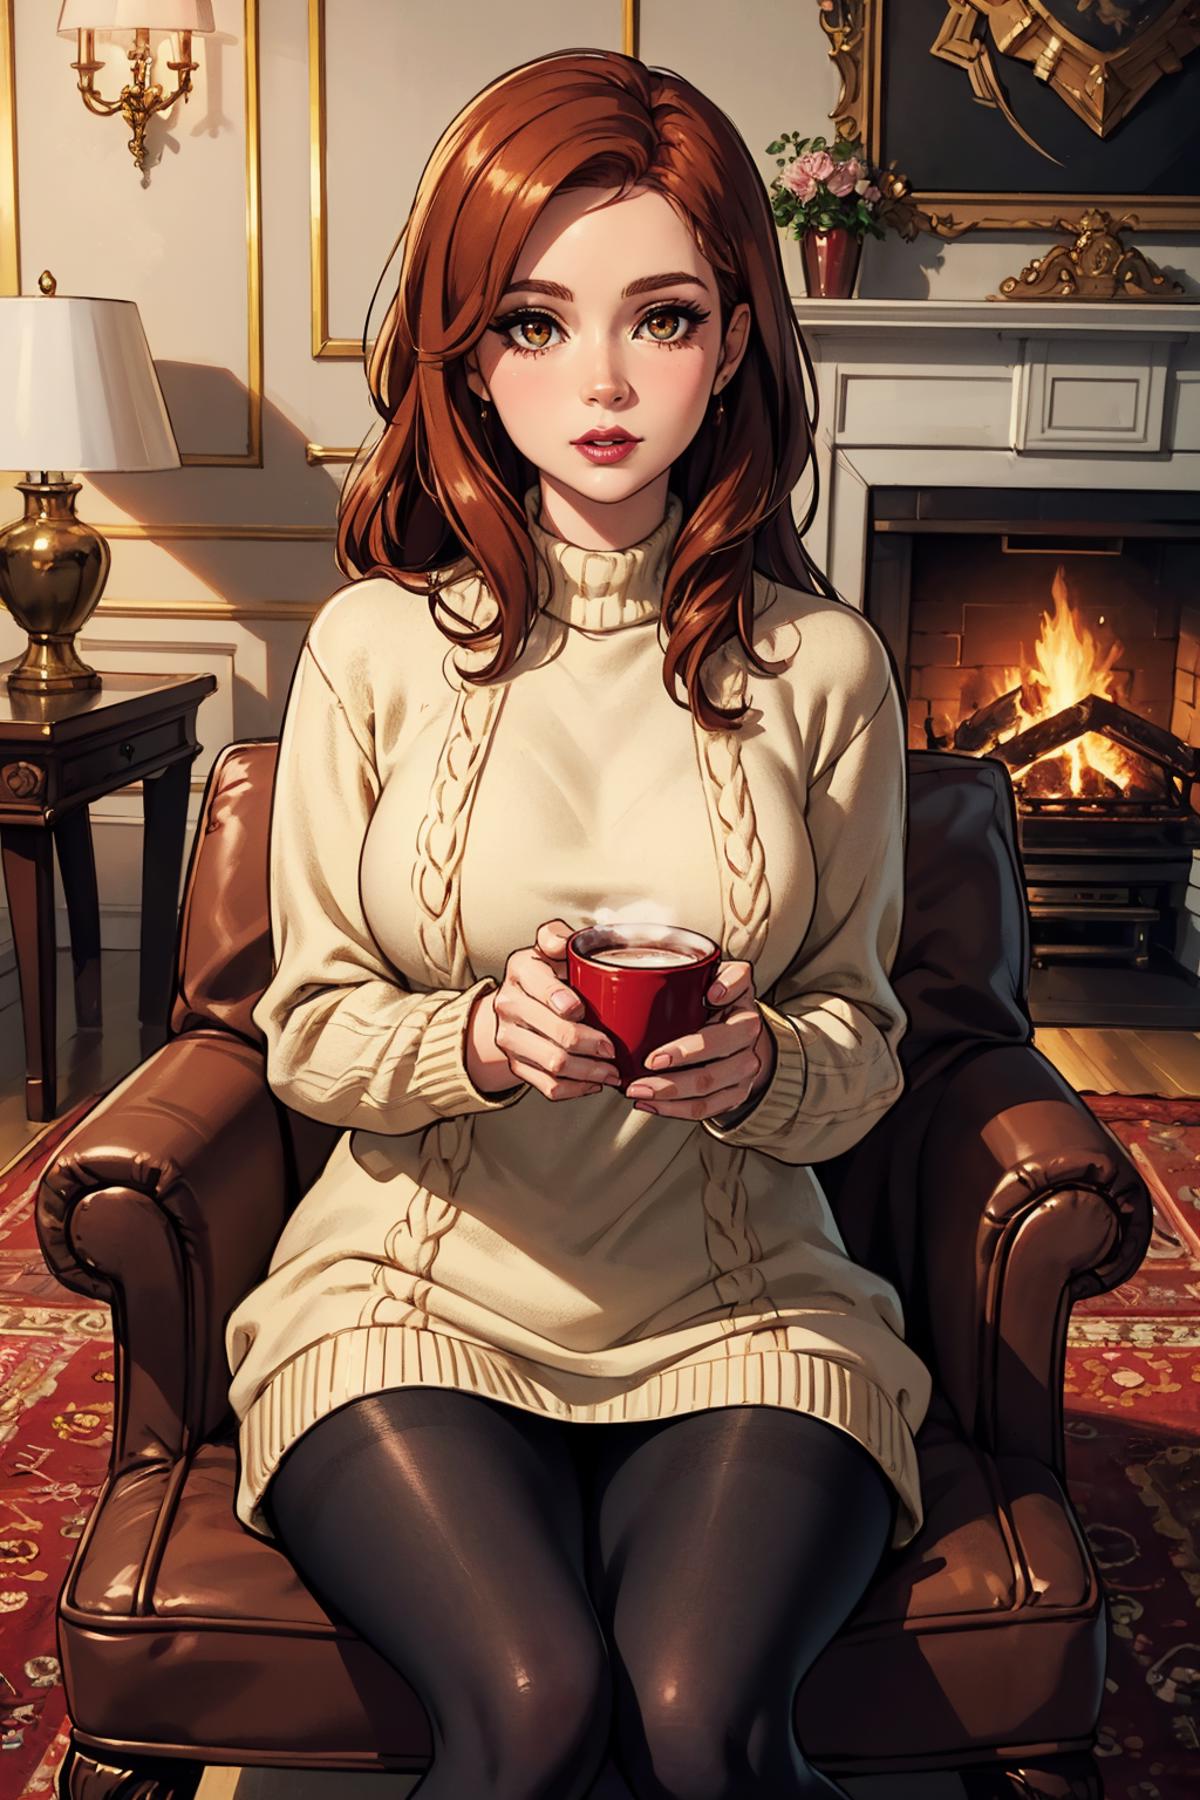 A woman sitting on a couch holding a red cup.